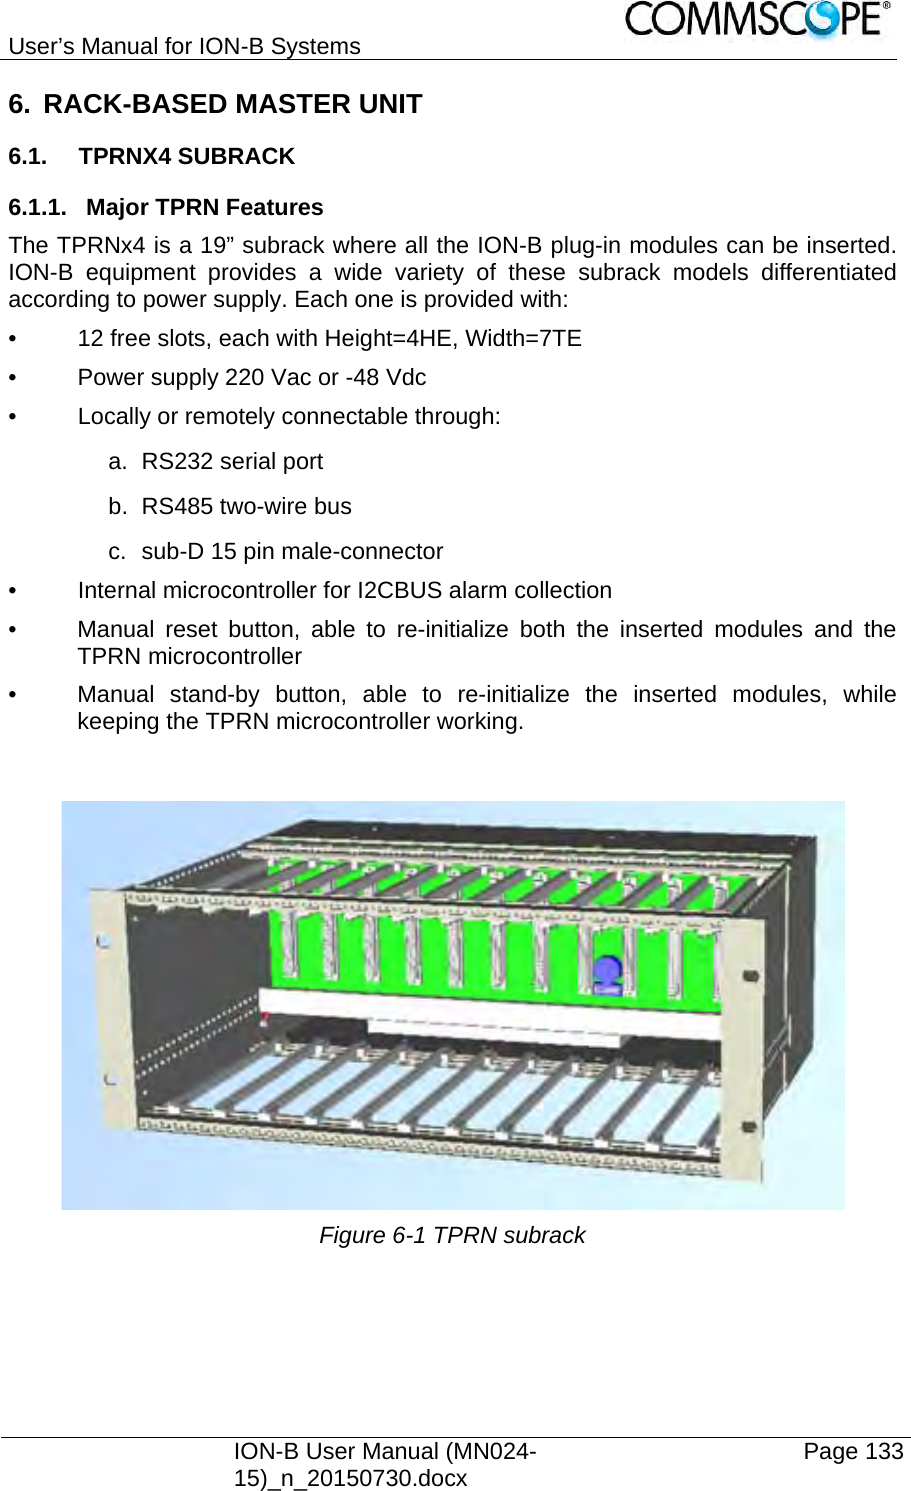 User’s Manual for ION-B Systems    ION-B User Manual (MN024-15)_n_20150730.docx  Page 133 6.  RACK-BASED MASTER UNIT 6.1. TPRNX4 SUBRACK 6.1.1. Major TPRN Features The TPRNx4 is a 19” subrack where all the ION-B plug-in modules can be inserted. ION-B equipment provides a wide variety of these subrack models differentiated according to power supply. Each one is provided with: •  12 free slots, each with Height=4HE, Width=7TE •  Power supply 220 Vac or -48 Vdc •  Locally or remotely connectable through: a. RS232 serial port b.  RS485 two-wire bus c.  sub-D 15 pin male-connector •  Internal microcontroller for I2CBUS alarm collection •  Manual reset button, able to re-initialize both the inserted modules and the TPRN microcontroller •  Manual stand-by button, able to re-initialize the inserted modules, while keeping the TPRN microcontroller working.    Figure 6-1 TPRN subrack   